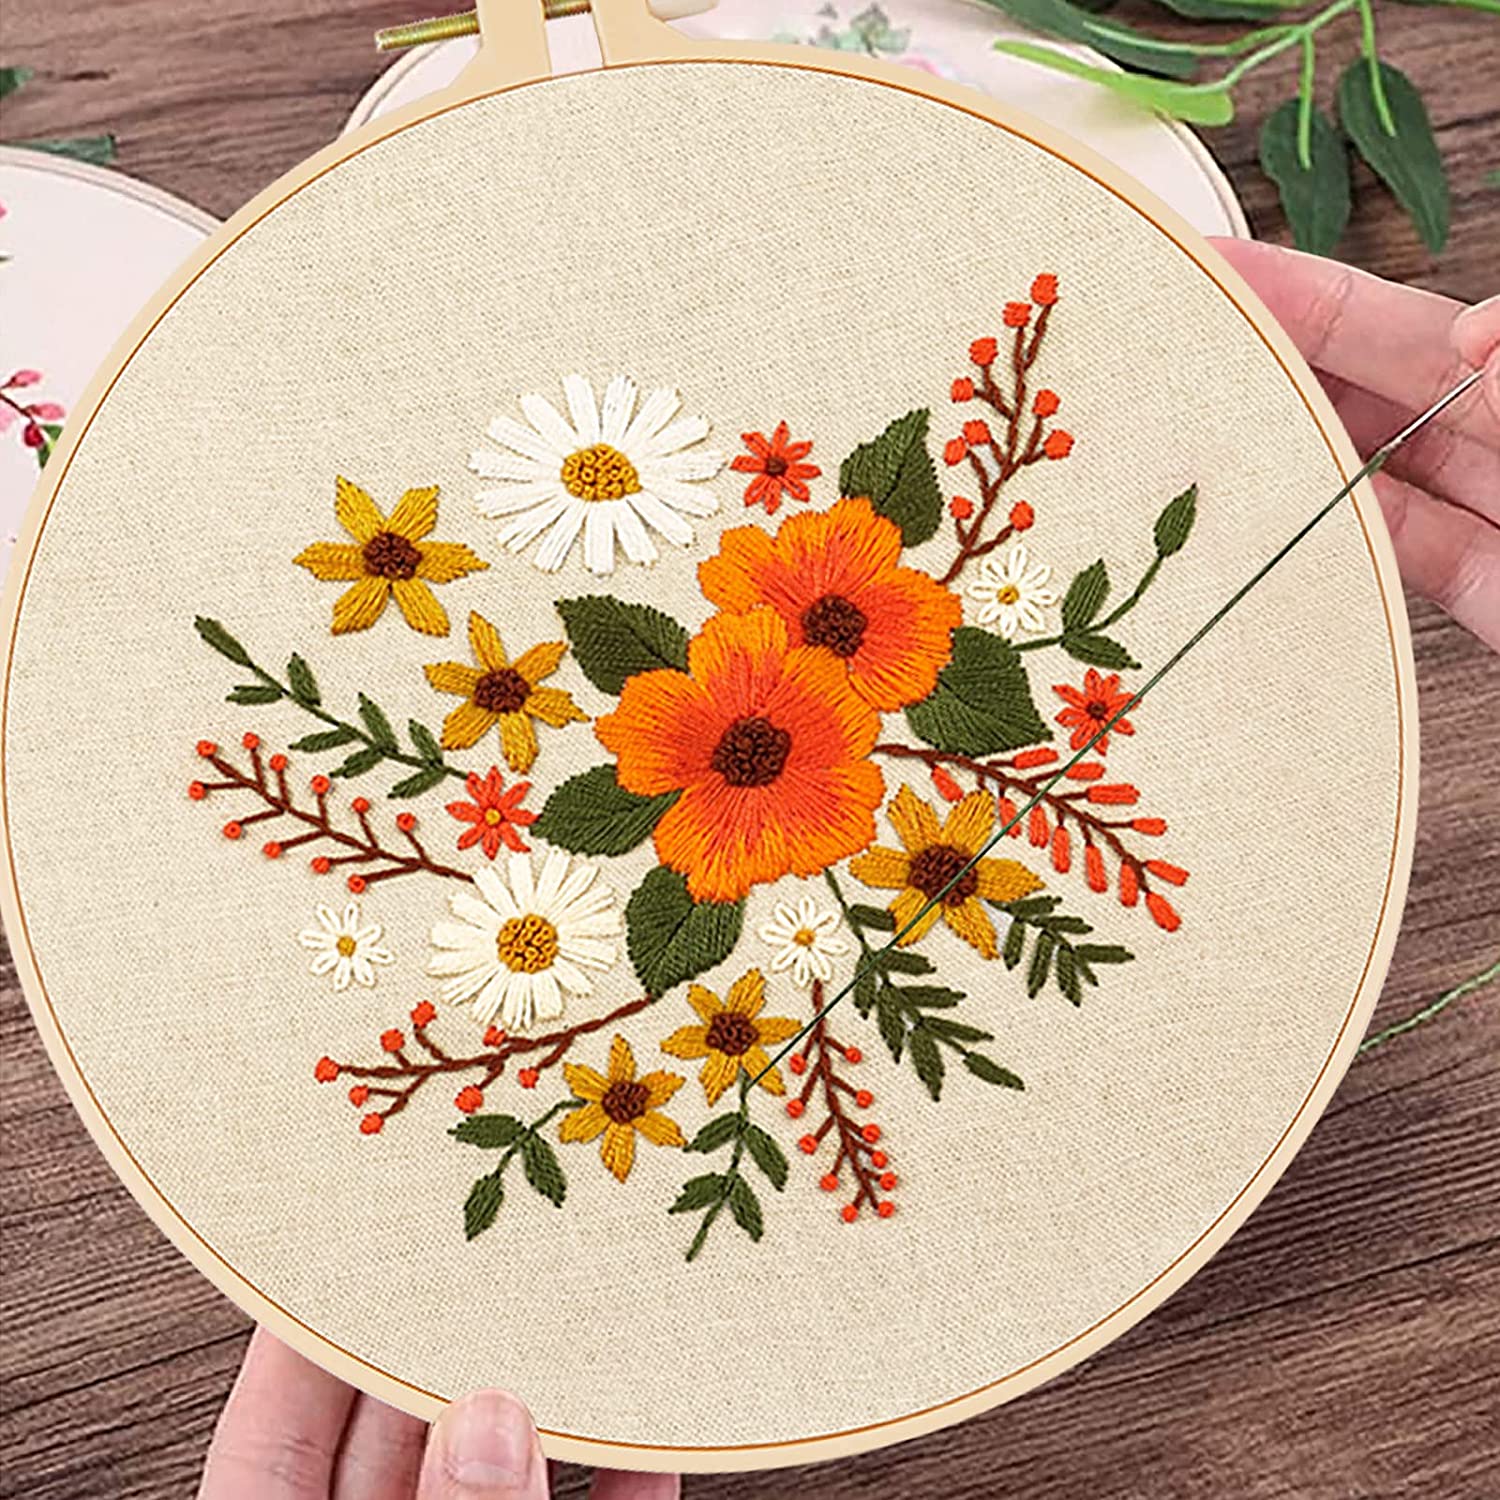 DIY Embroidery Kit for Beginners